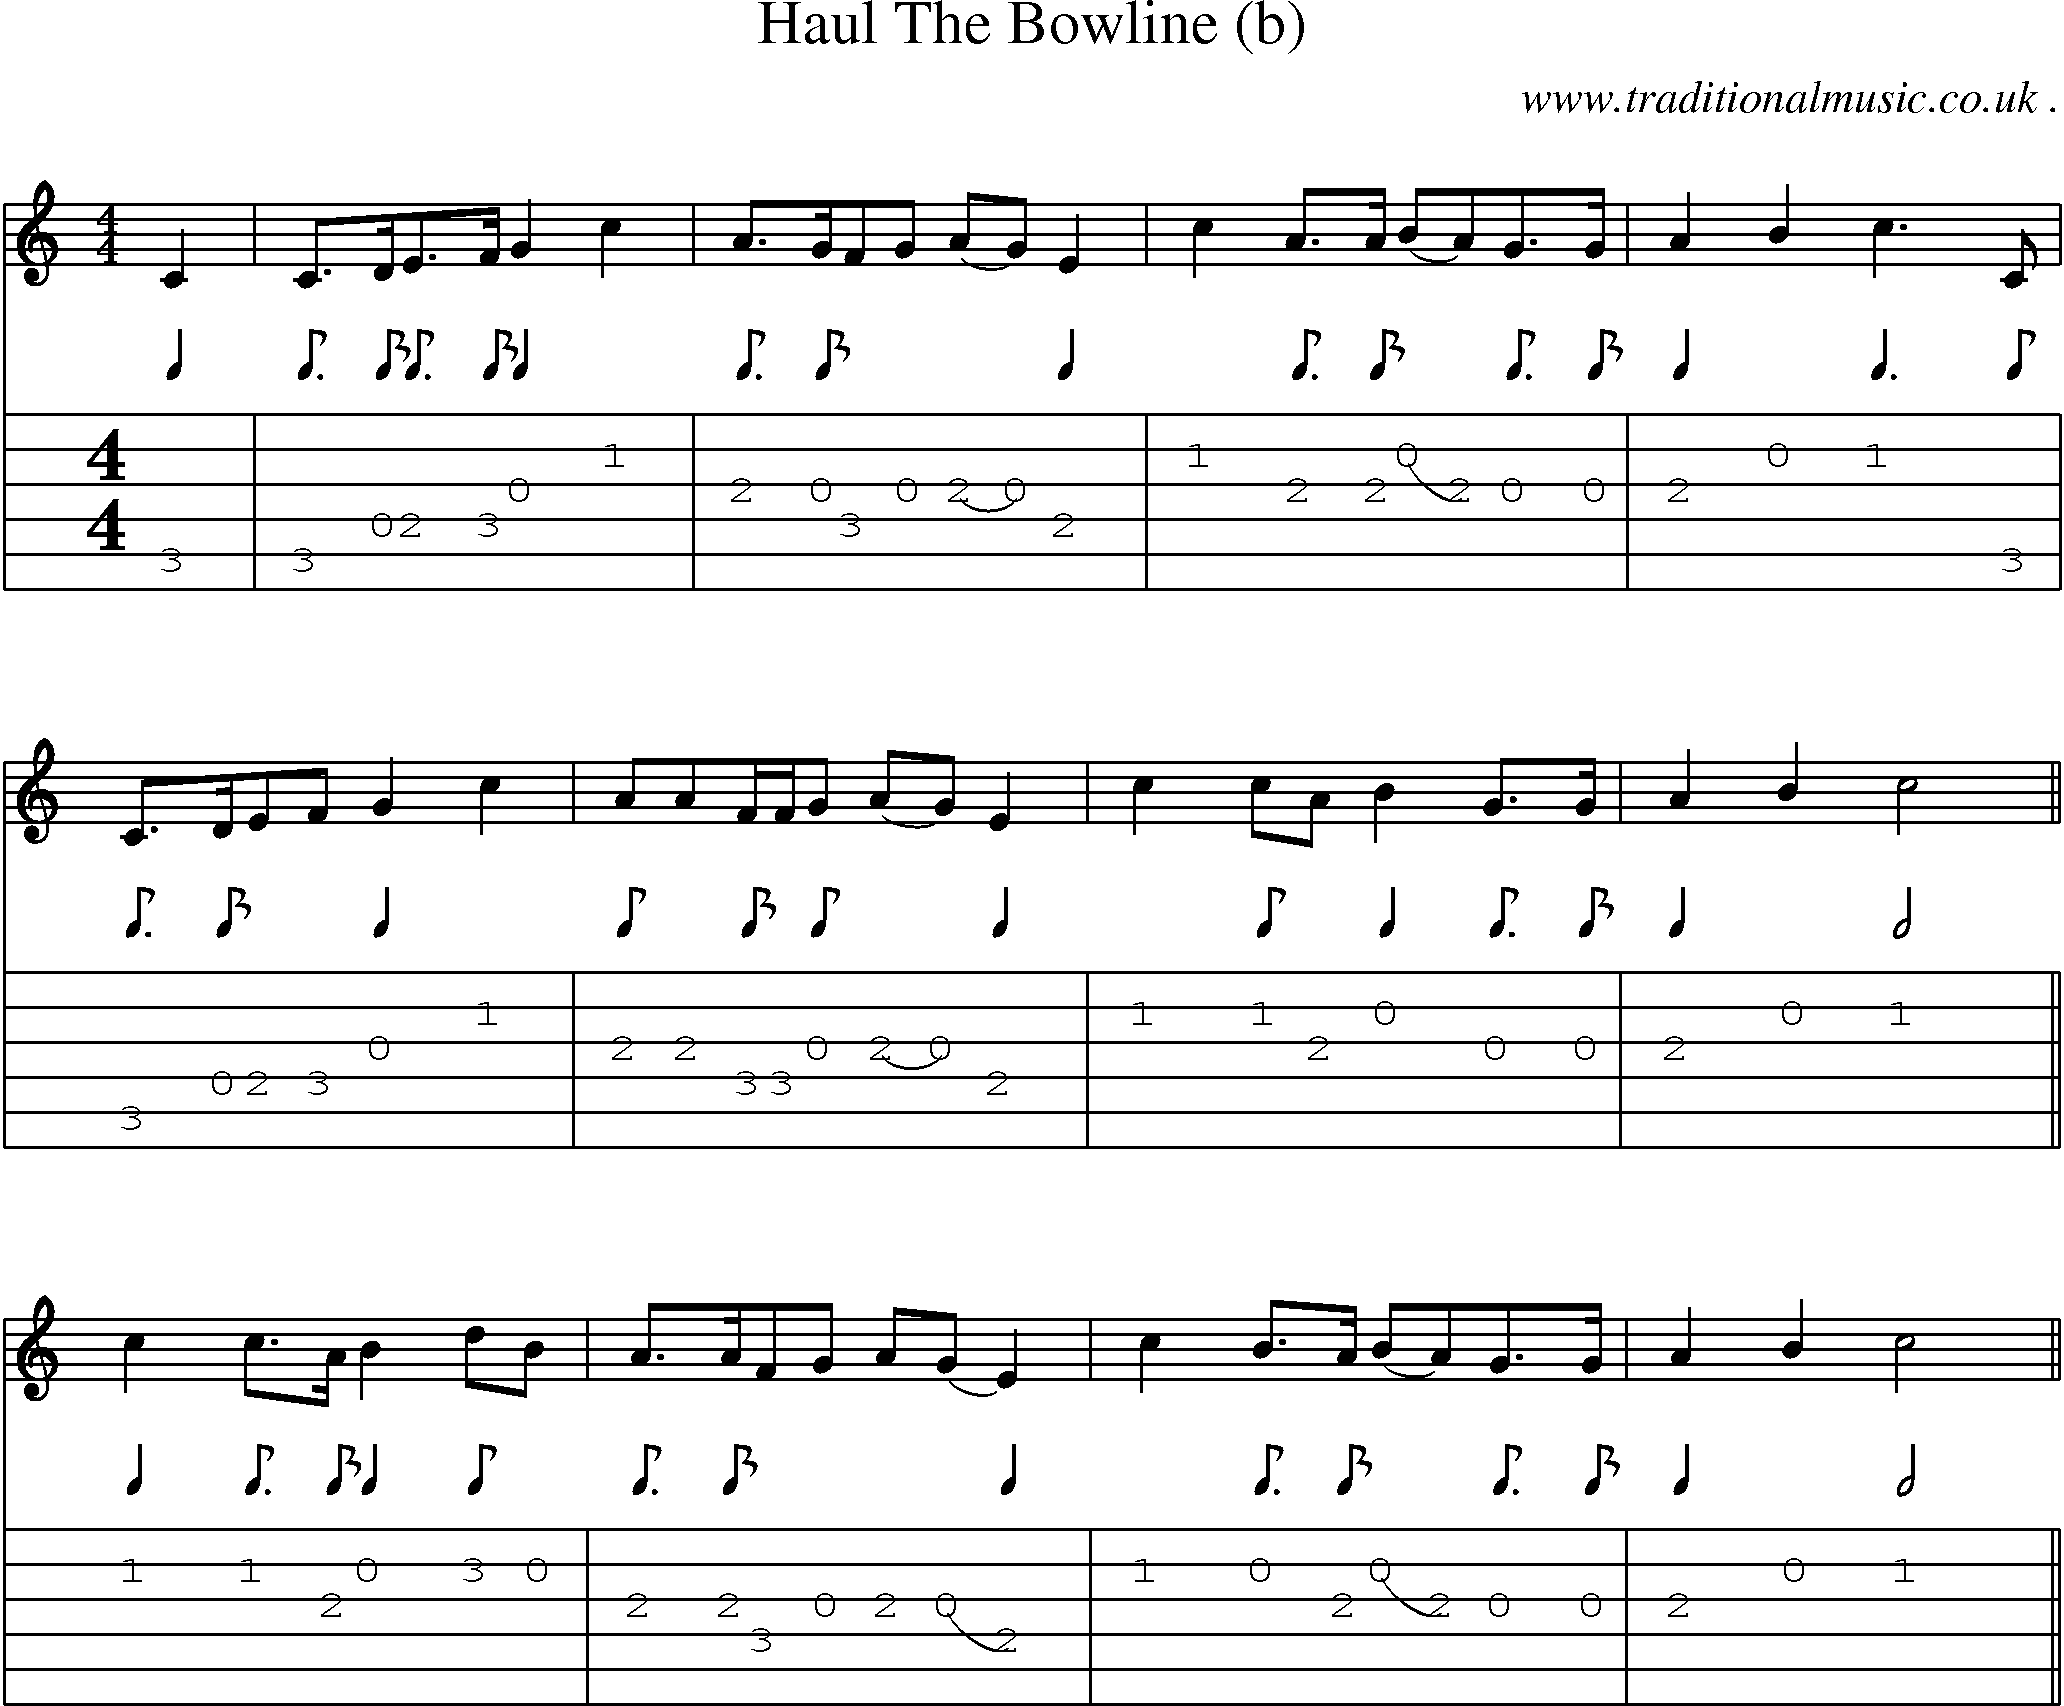 Sheet-Music and Guitar Tabs for Haul The Bowline (b)